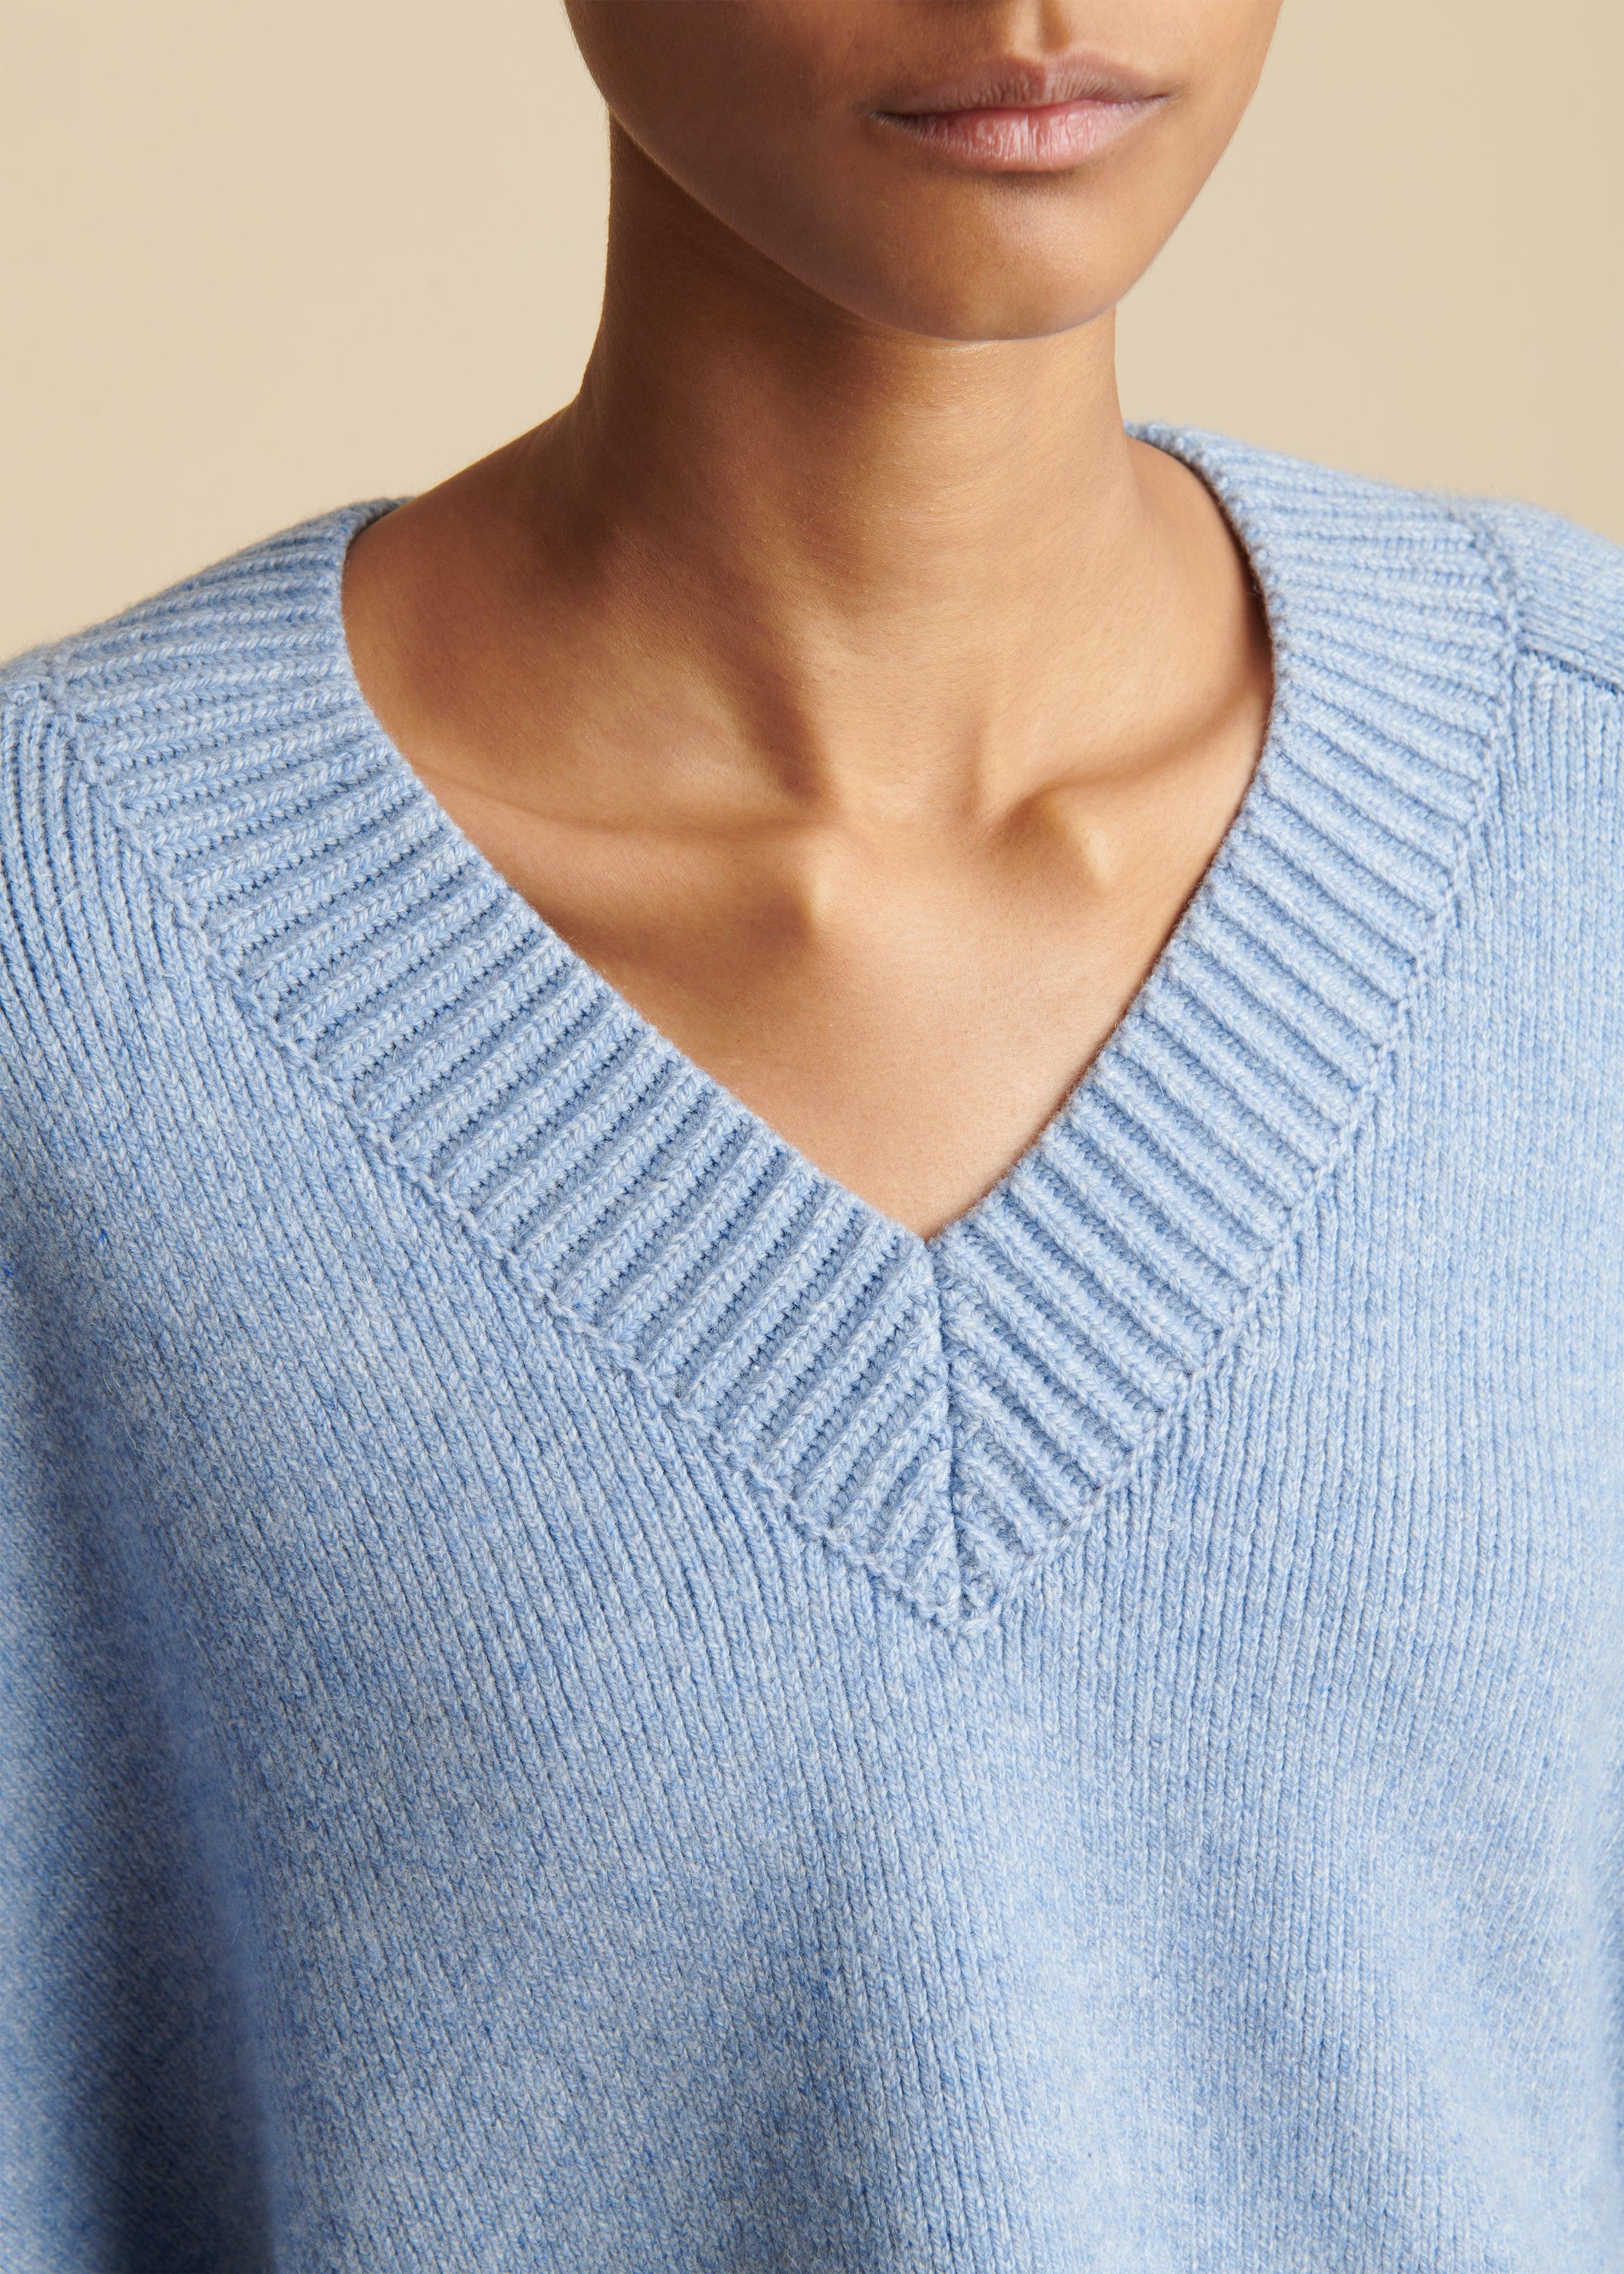 The Lenina Sweater in Polar - The Iconic Issue